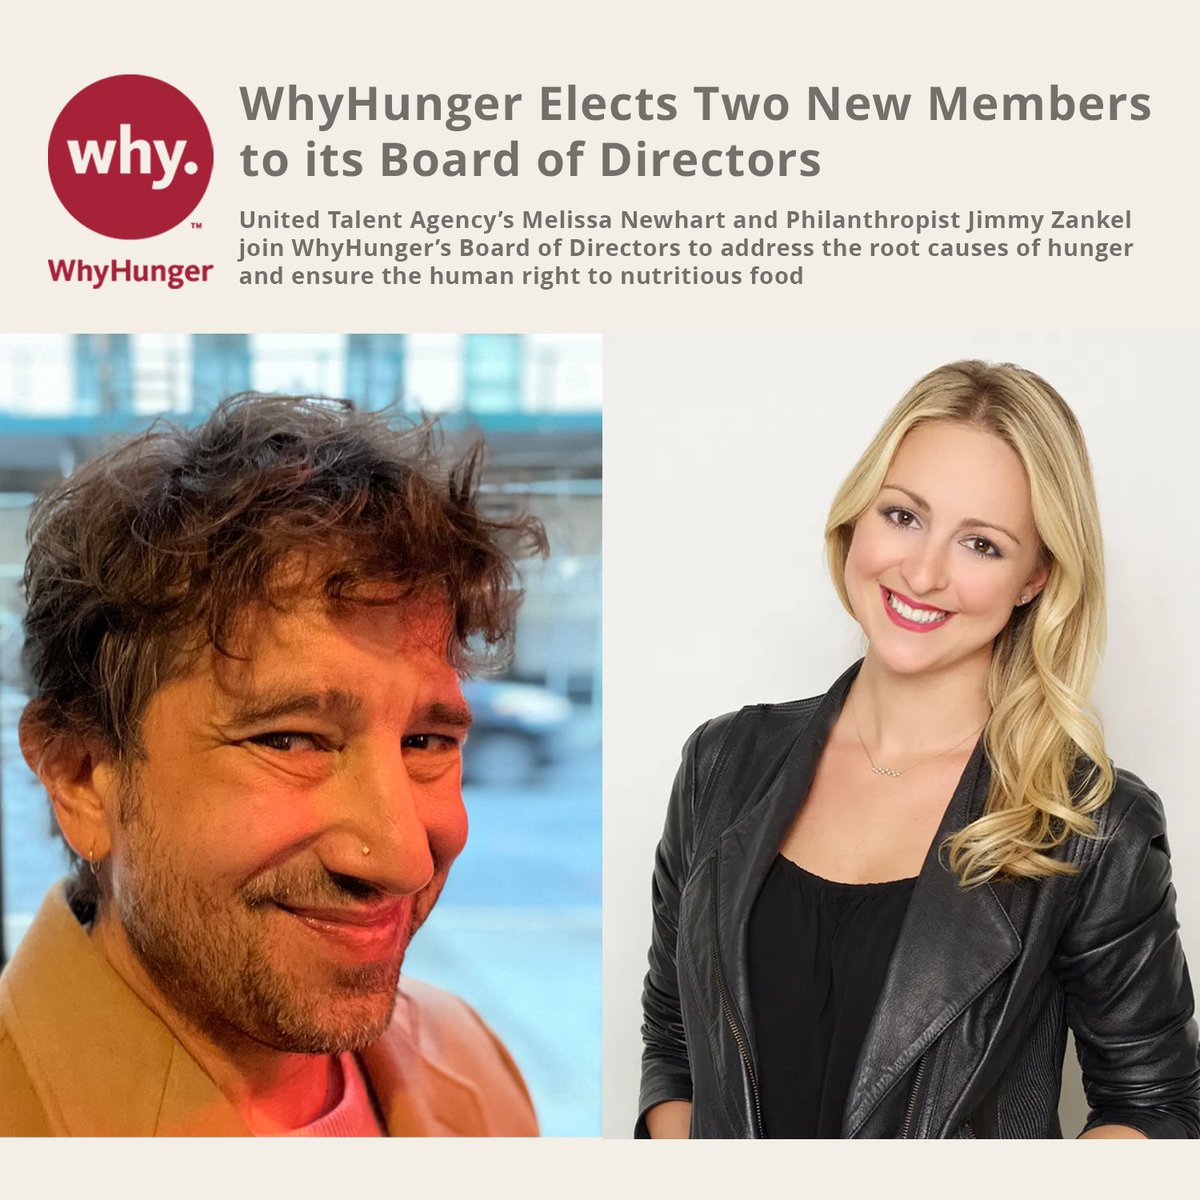 We are excited to welcome Melissa Newhart from UTA & Jimmy Zankel of the Zankel Scala Family Foundation to our Board of Directors! We value their shared passion for music & change to advance the right to nutritious food for all! Read our press release: bit.ly/4aVnEpd